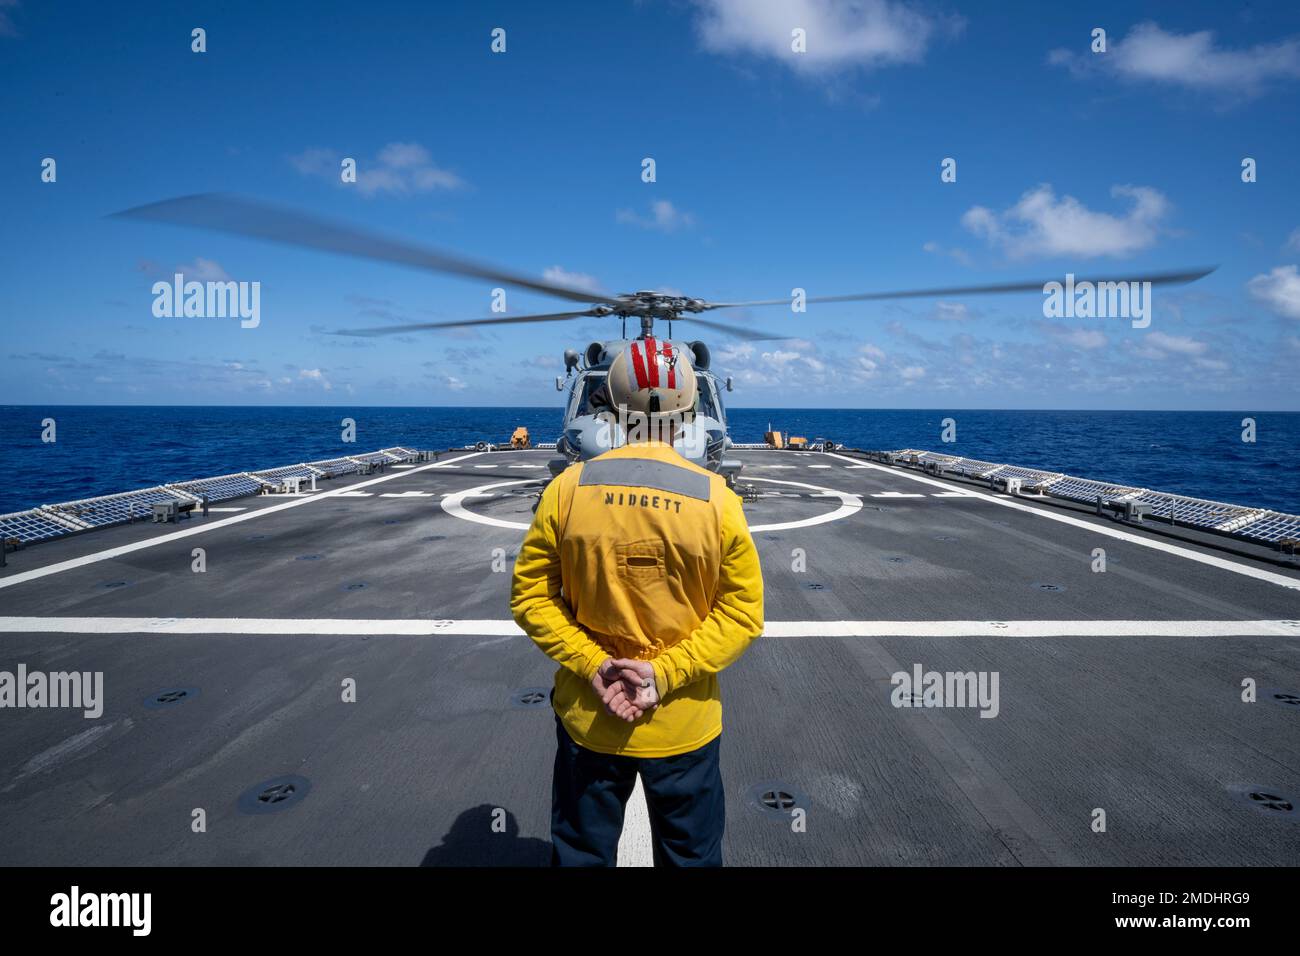 PACIFIC OCEAN (July 24, 2022) A U.S. Coast Guard Legend-class cutter USCGC Midgett (WMSL 757) Sailor stands by while a U.S. Navy MH-60R Seahawk helicopter spins up during flight operations during Rim of the Pacific (RIMPAC) 2022. Twenty-six nations, 38 ships, three submarines, more than 170 aircraft and 25,000 personnel are participating in RIMPAC from June 29 to Aug. 4 in and around the Hawaiian Islands and Southern California. The worlds largest international maritime exercise, RIMPAC provides a unique training opportunity while fostering and sustaining cooperative relationships among partic Stock Photo